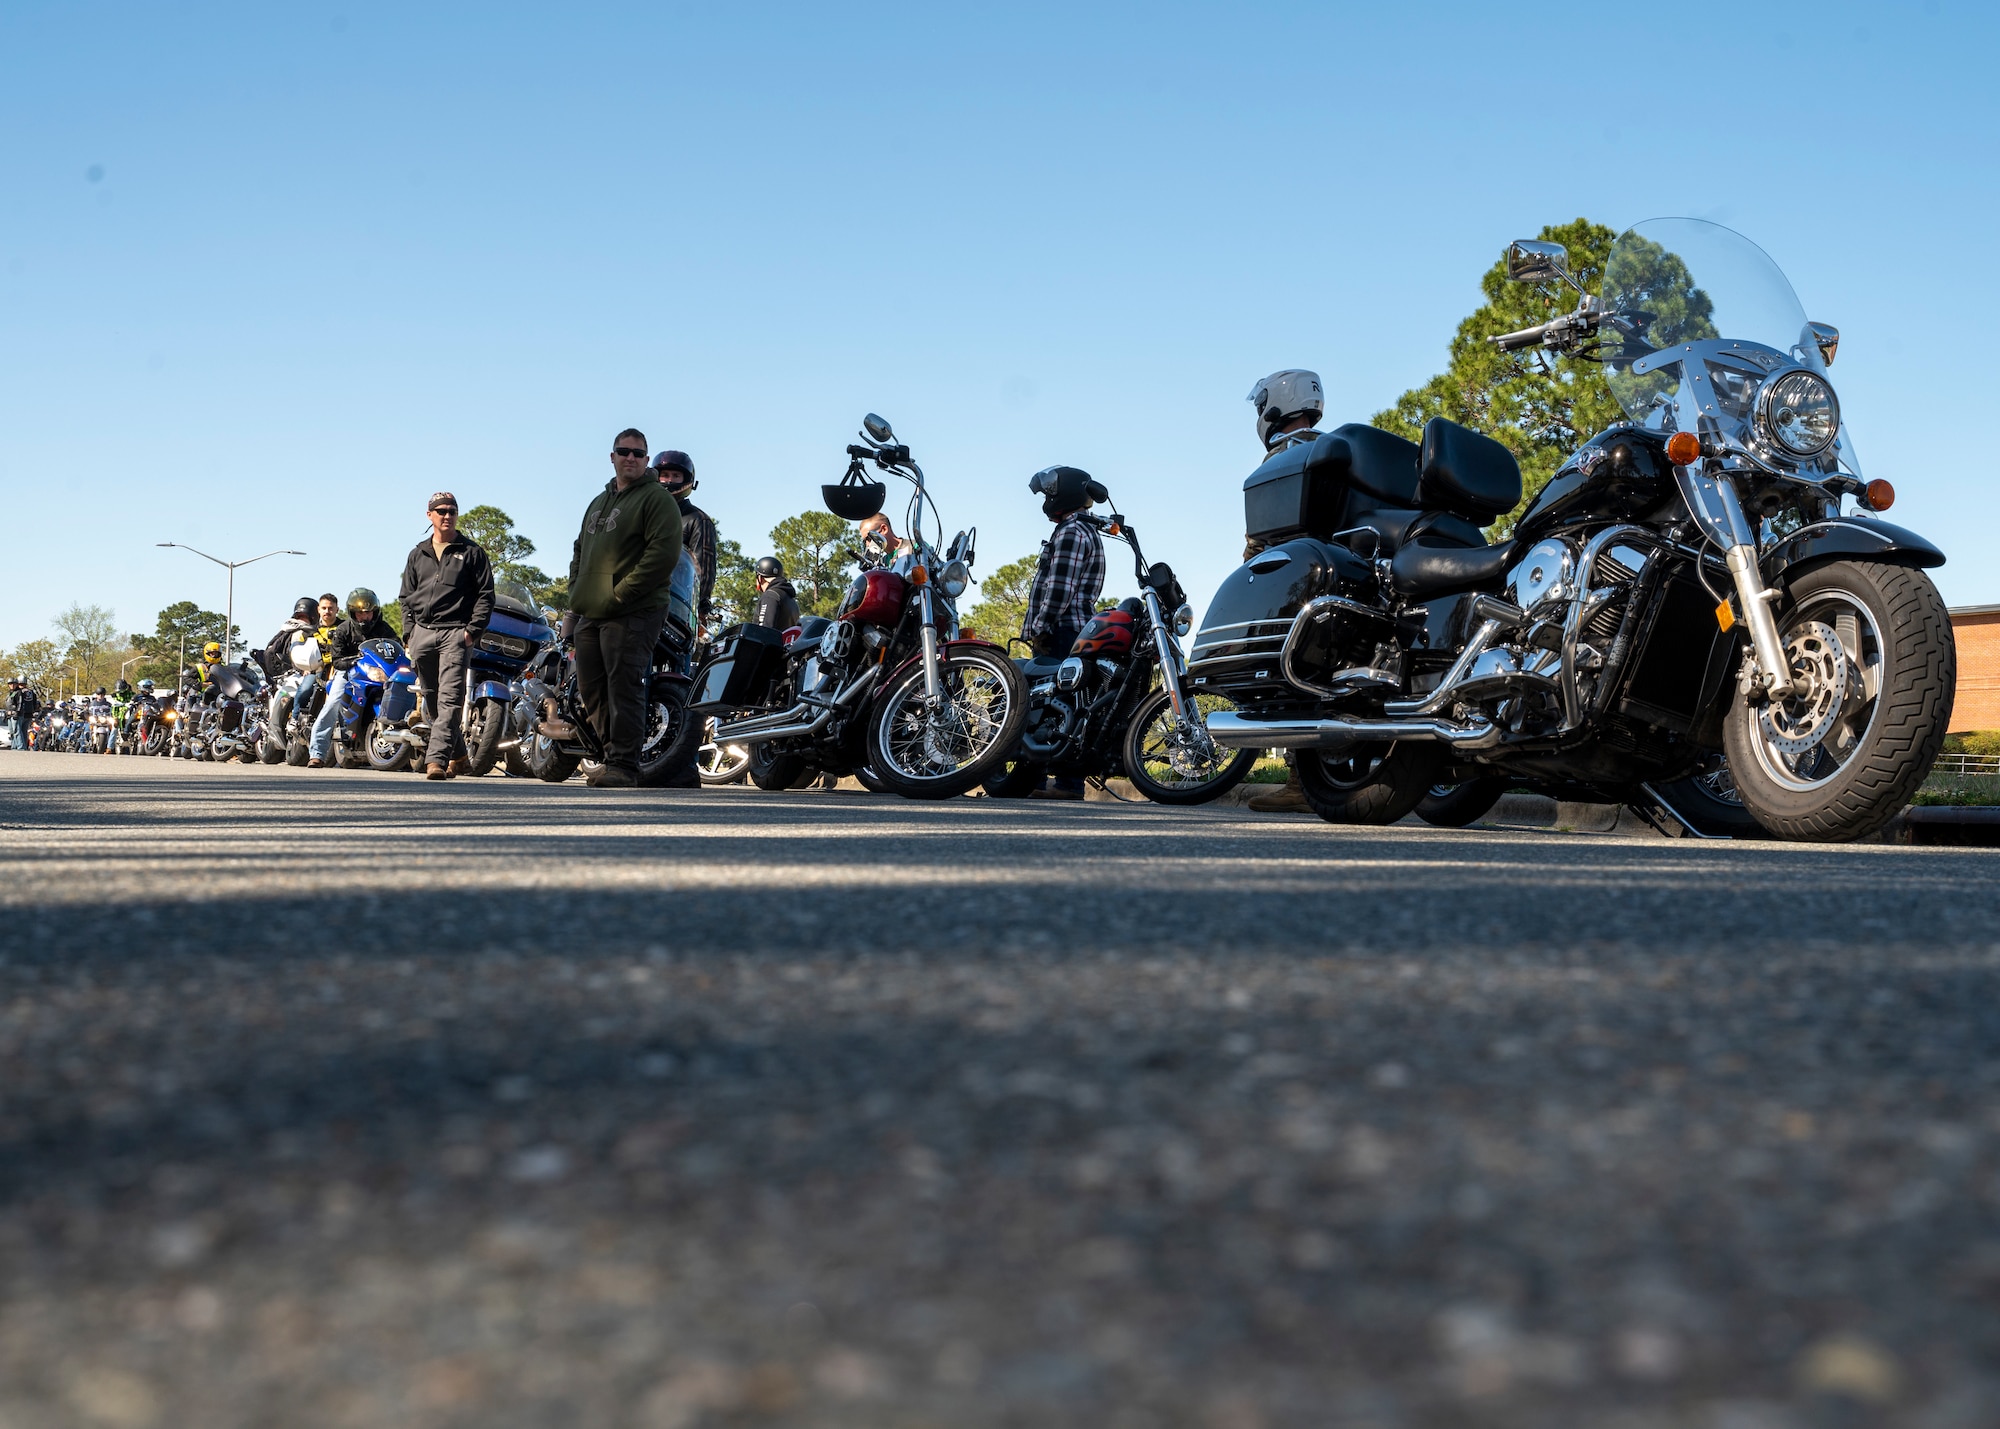 Members assigned to the 4th Fighter Wing gather before departing on a mentorship motorcycle ride at Seymour Johnson, North Carolina, April 1, 2022.